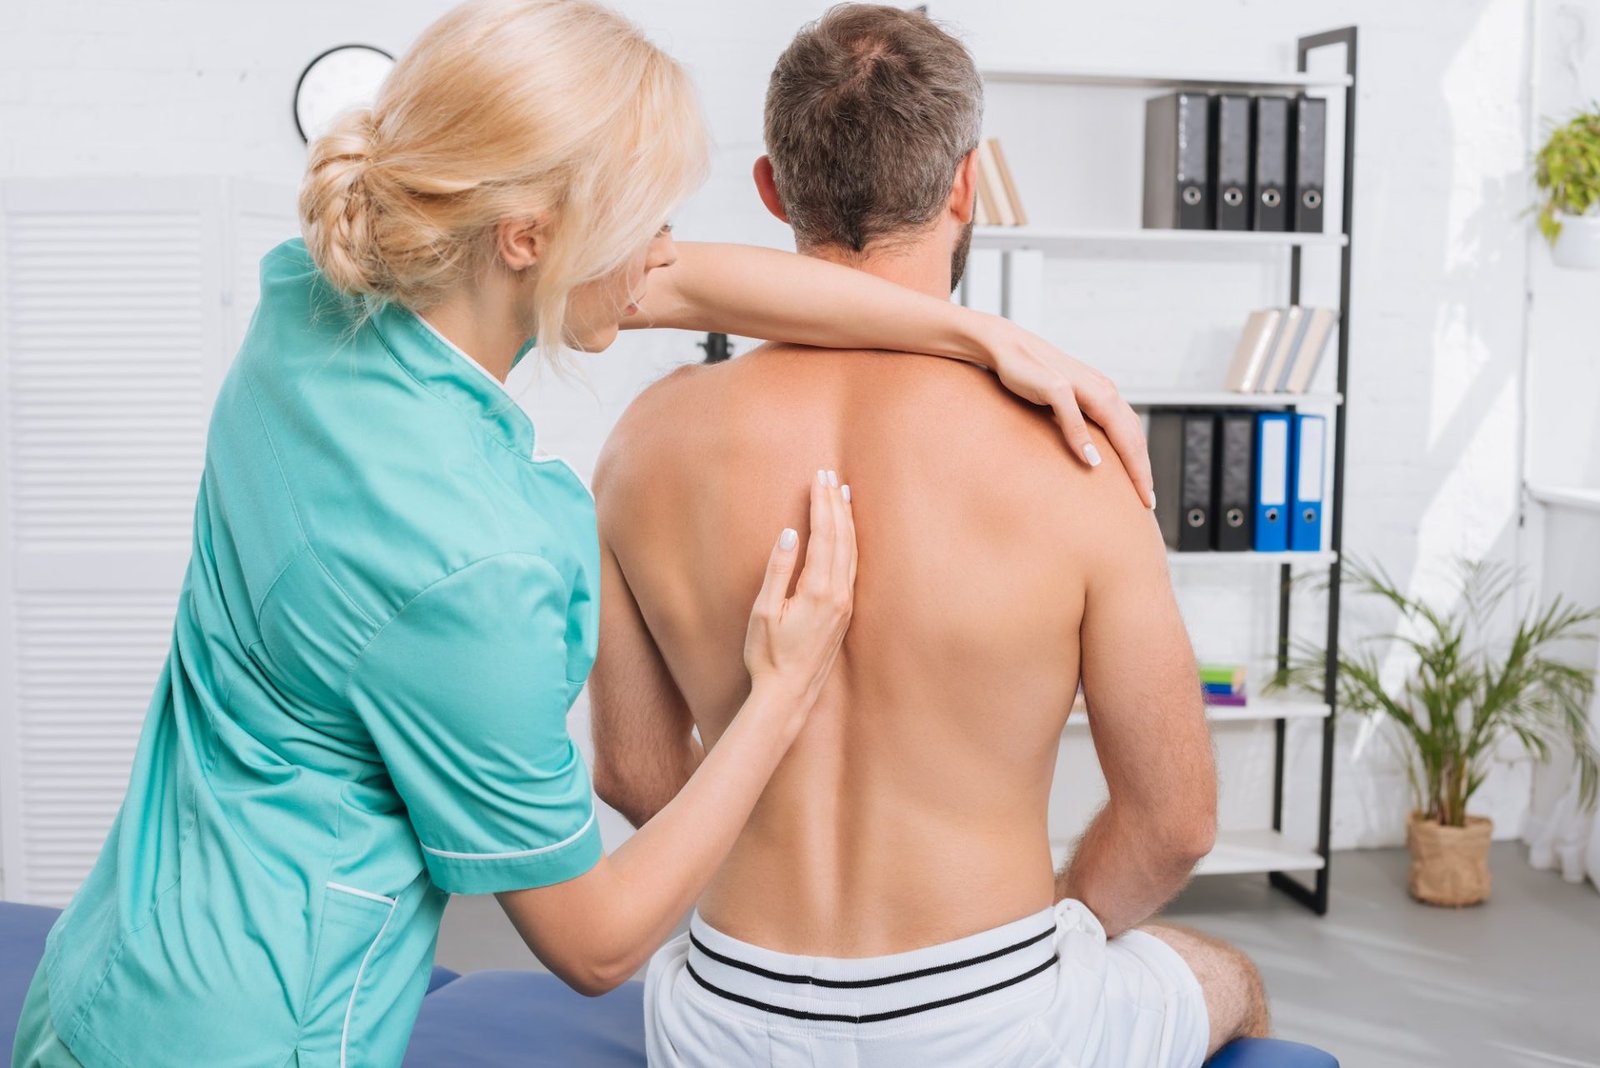 back-view-of-man-having-chiropractic-adjustment-in-clinic-e1683682730850.jpg